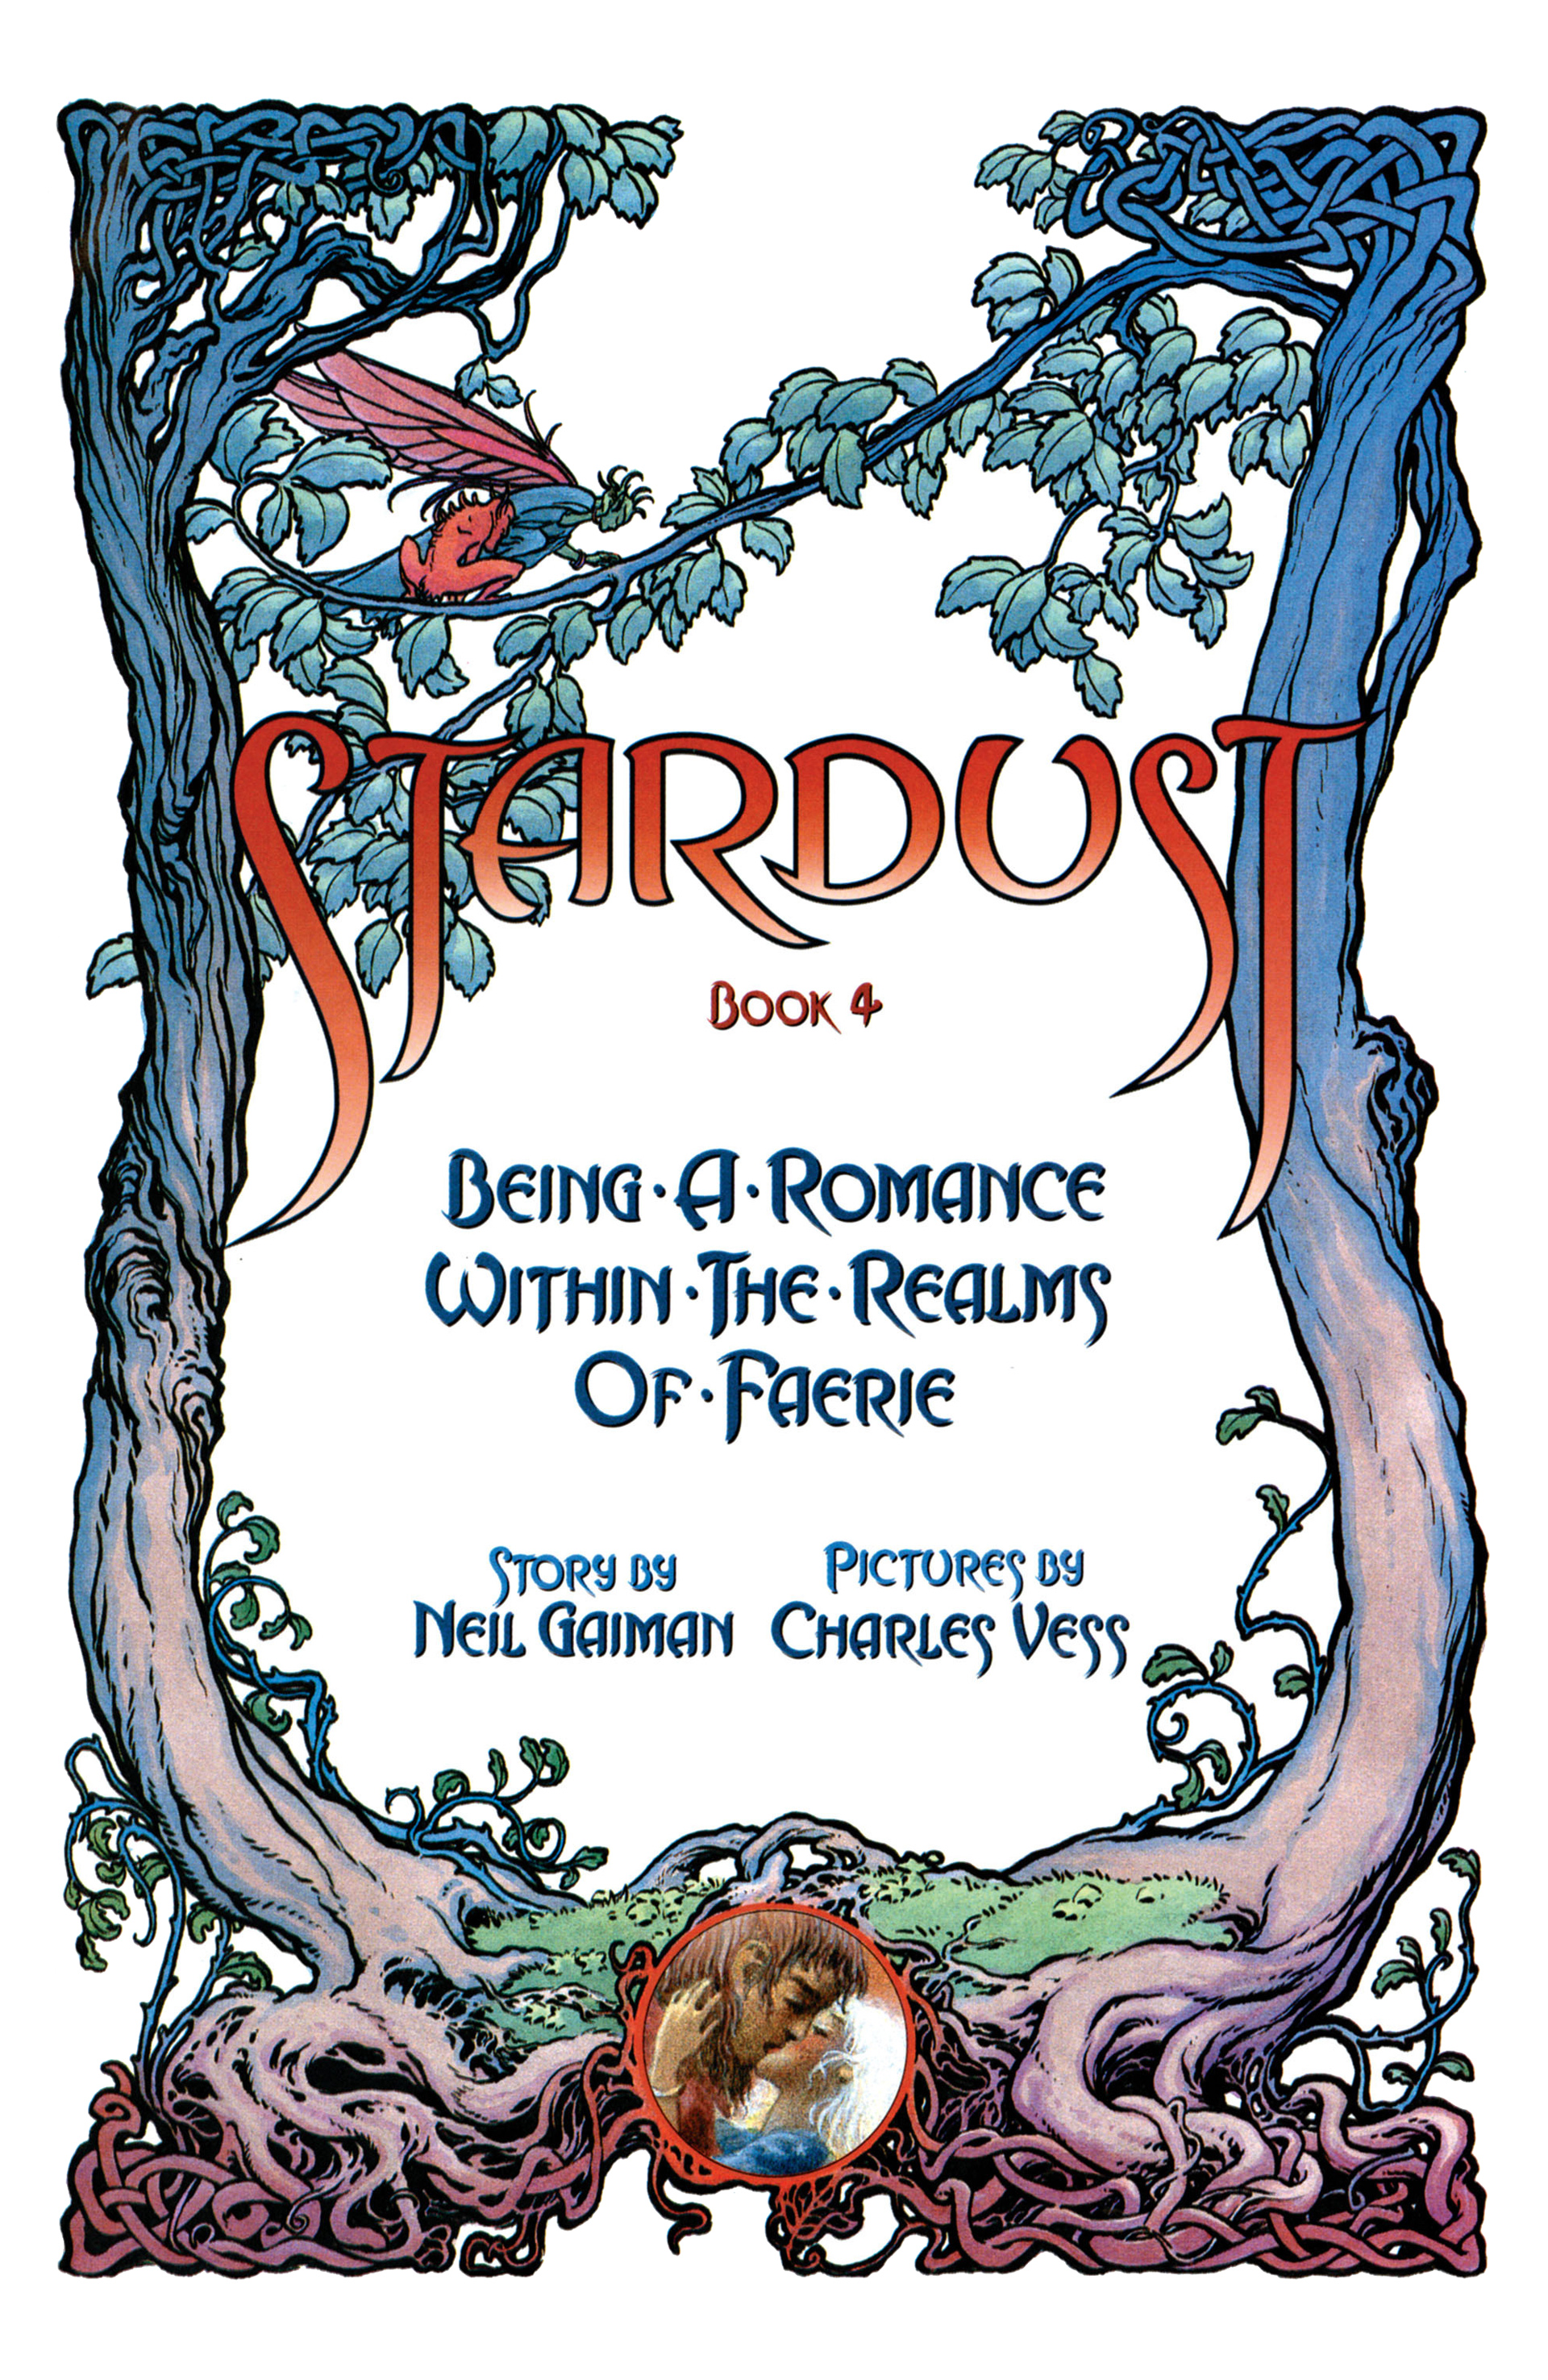 Read online Neil Gaiman and Charles Vess' Stardust comic -  Issue #4 - 3